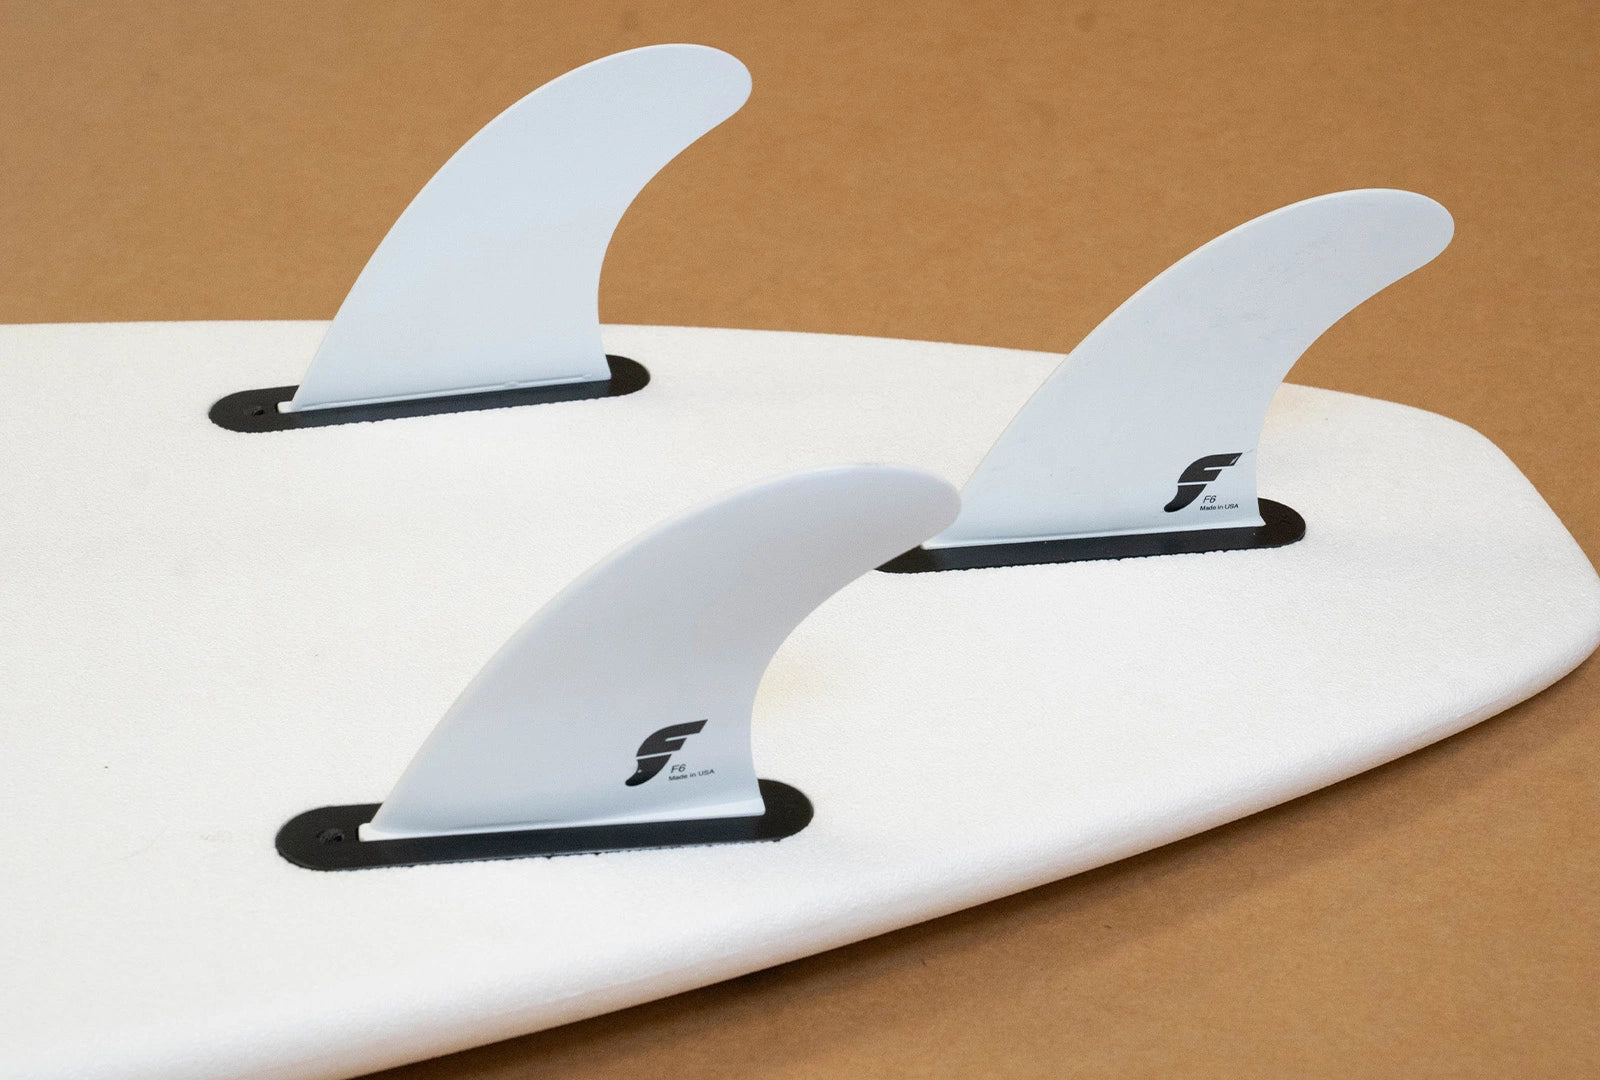 A Formula Fun Zippers surfboard with a thruster fin set up from Futures Fins